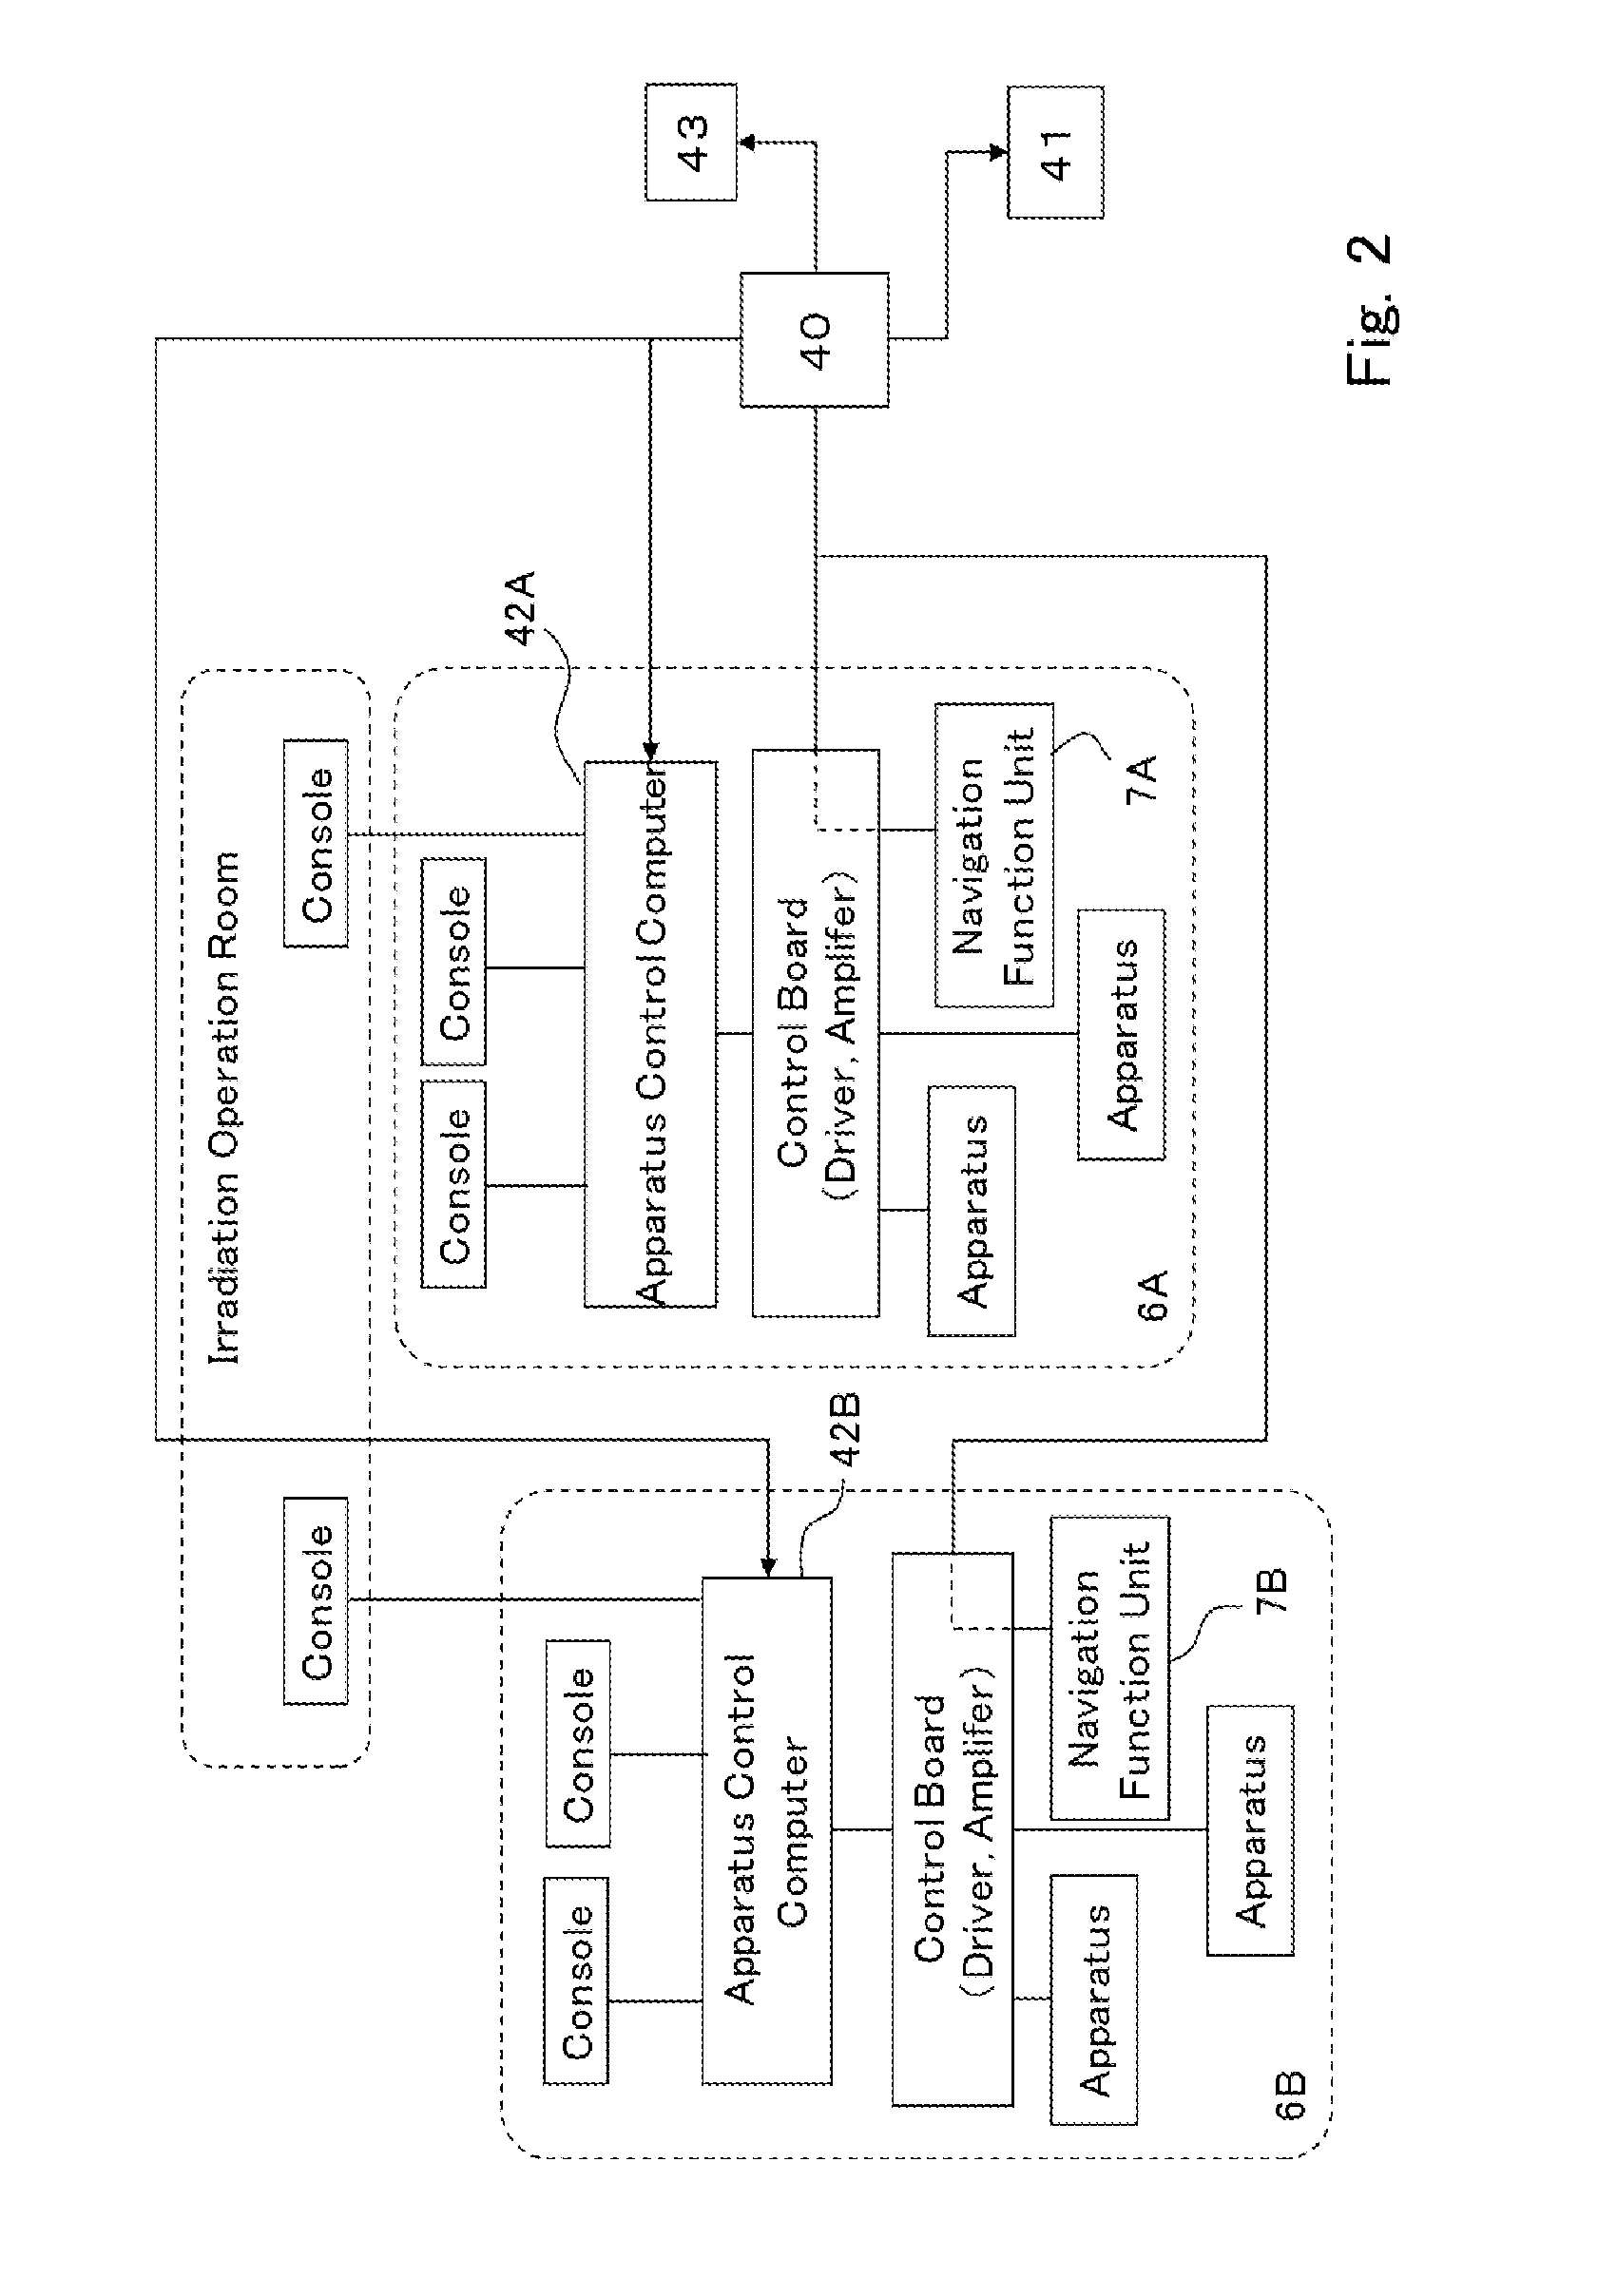 Respiratory induction apparatus, respiratory induction program, and particle beam therapy system